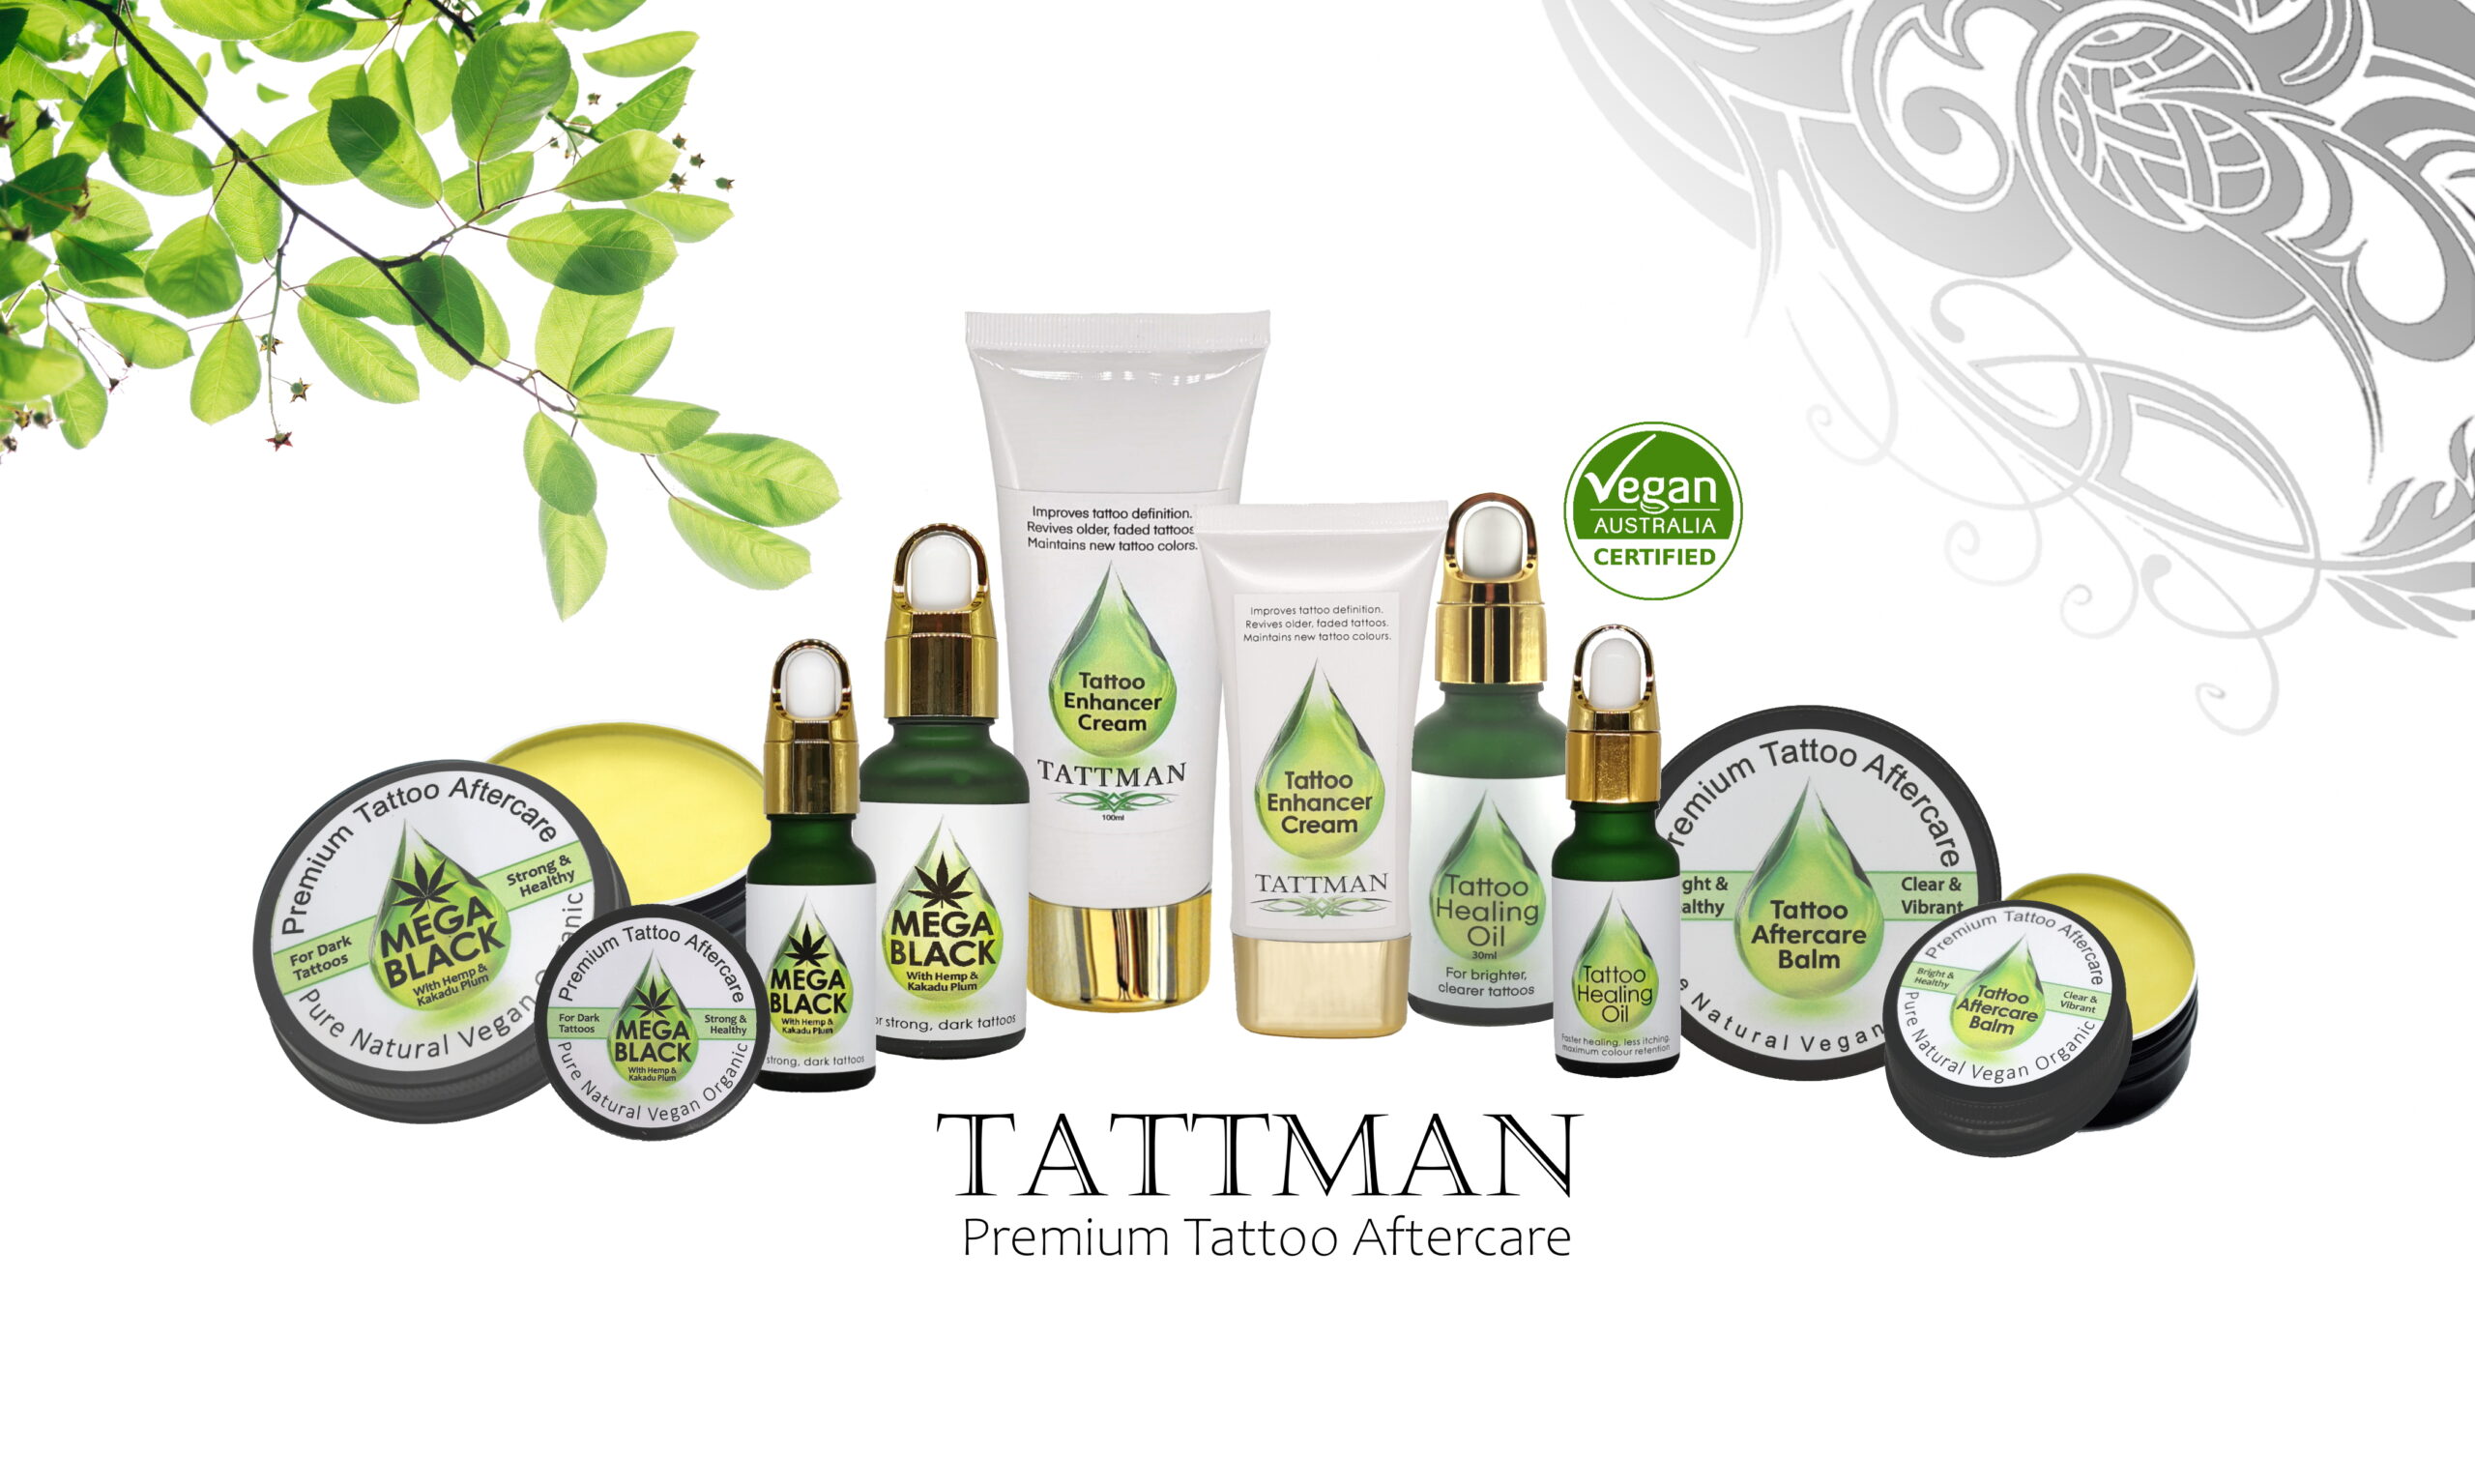 Tattman premium Tattoo aftercare products:

Tattman tattoo aftercare products consist of:
Creams:  With 11 different ingredients in 50 ml and 100 ml sizes.
Balms:   With 9 different ingredients in 30 ml and 70 ml sizes.
Oils:   With 7 different ingredients in 20 ml and 30 ml sizes.
Mega Black balm for black ink 11 different ingredients in various sizes.
Mega Black oil for black ink 9 different ingredients in various sizes.